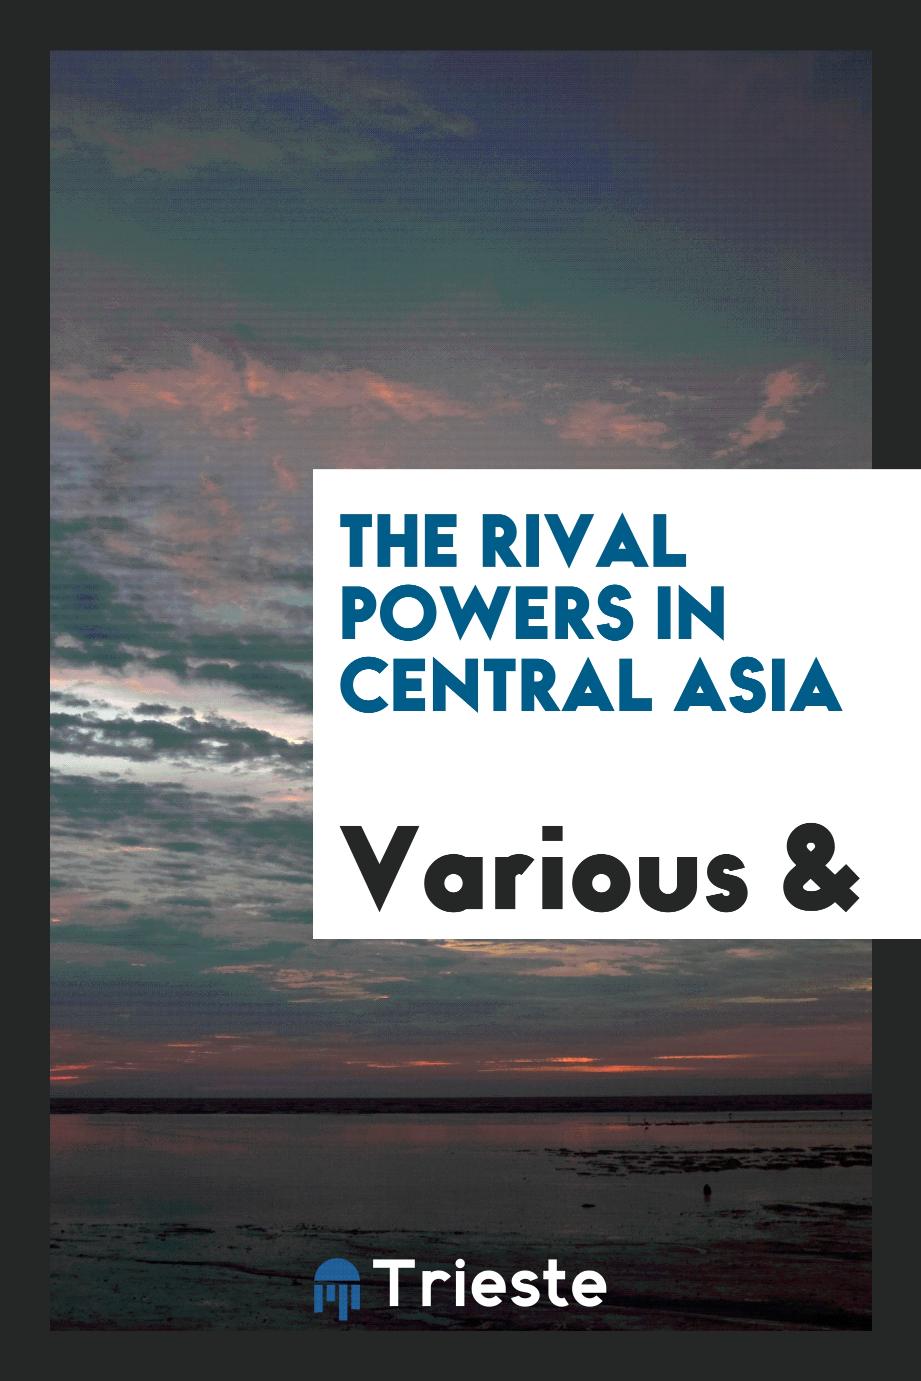 The rival powers in Central Asia